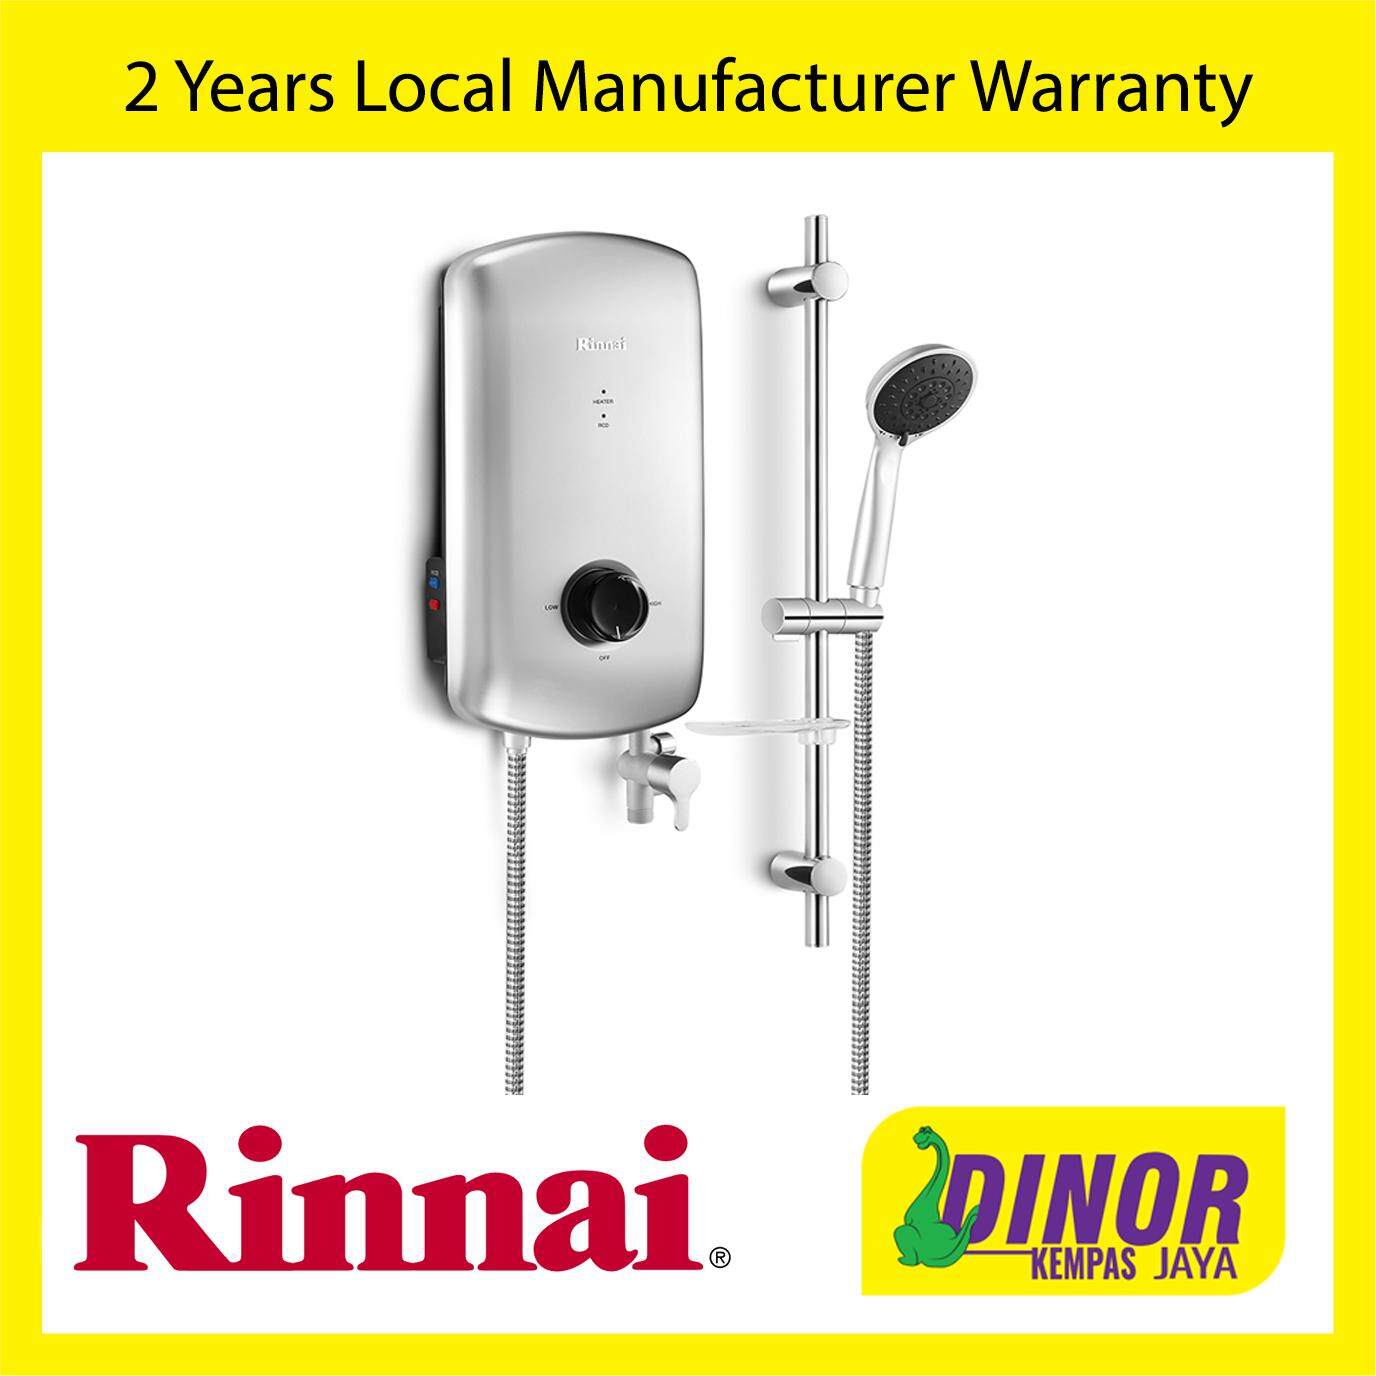 Rinnai Crystal Electric Water Heater (Handshower/No Pump) REI-B360NP-S (SAND SILVER)